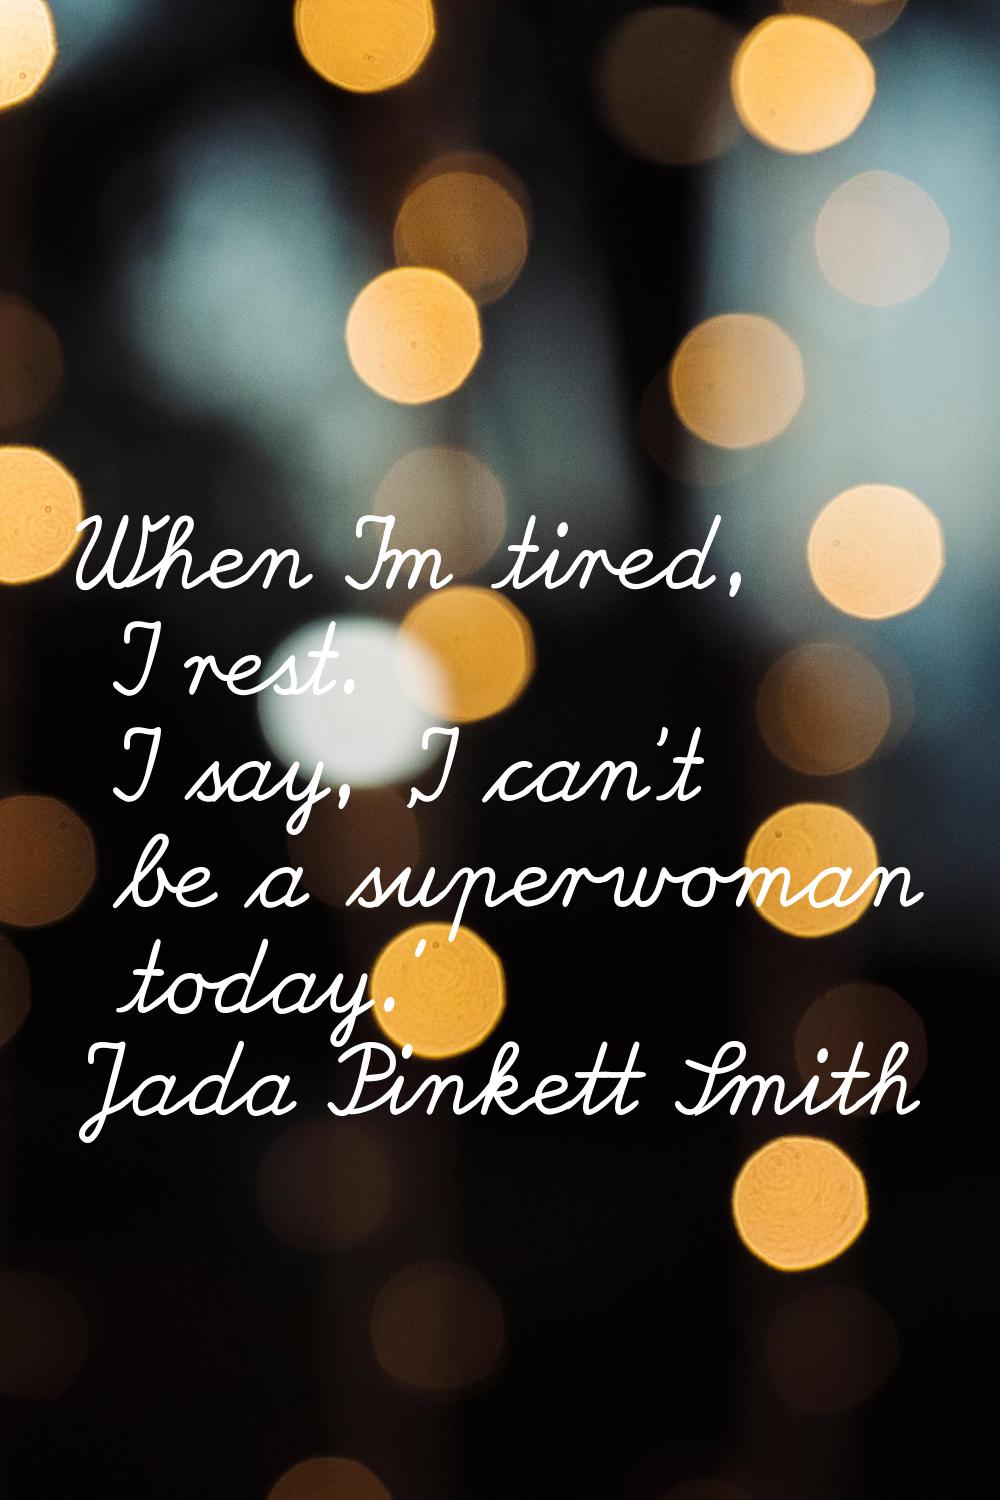 When I'm tired, I rest. I say, 'I can't be a superwoman today.'